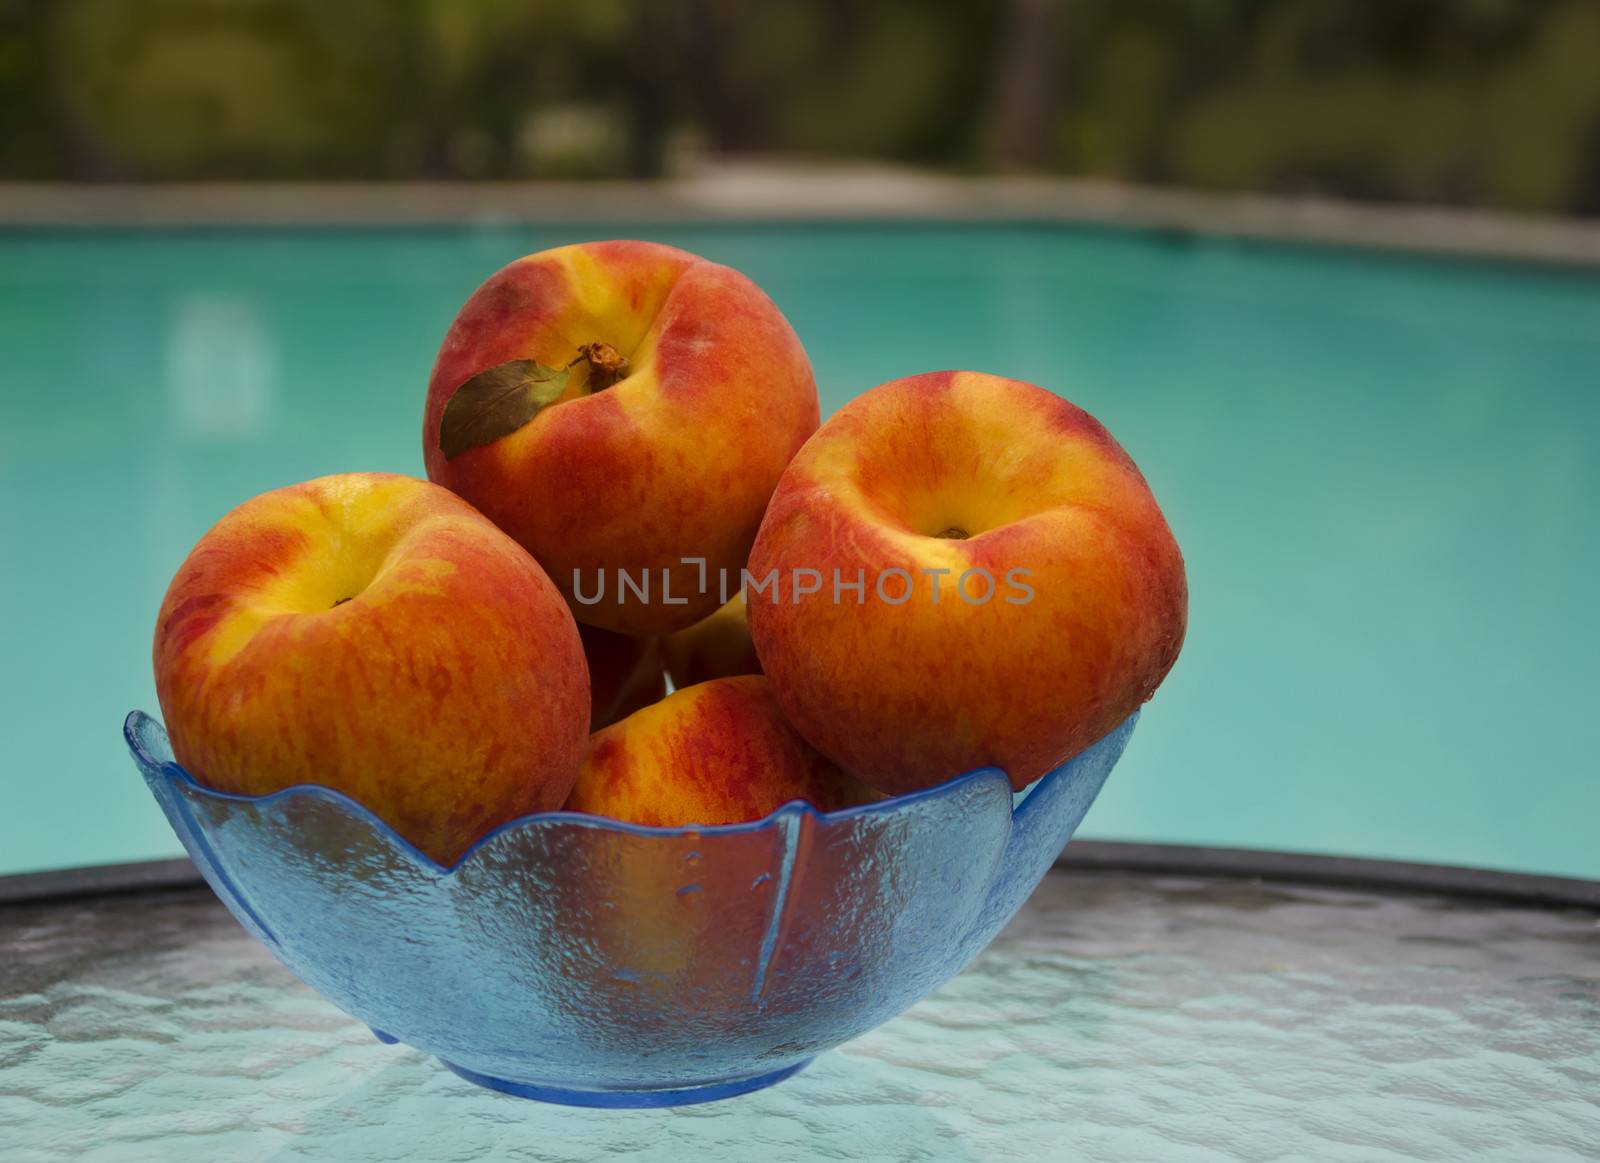 Peaches by the swimmimg pool by EllenSmile